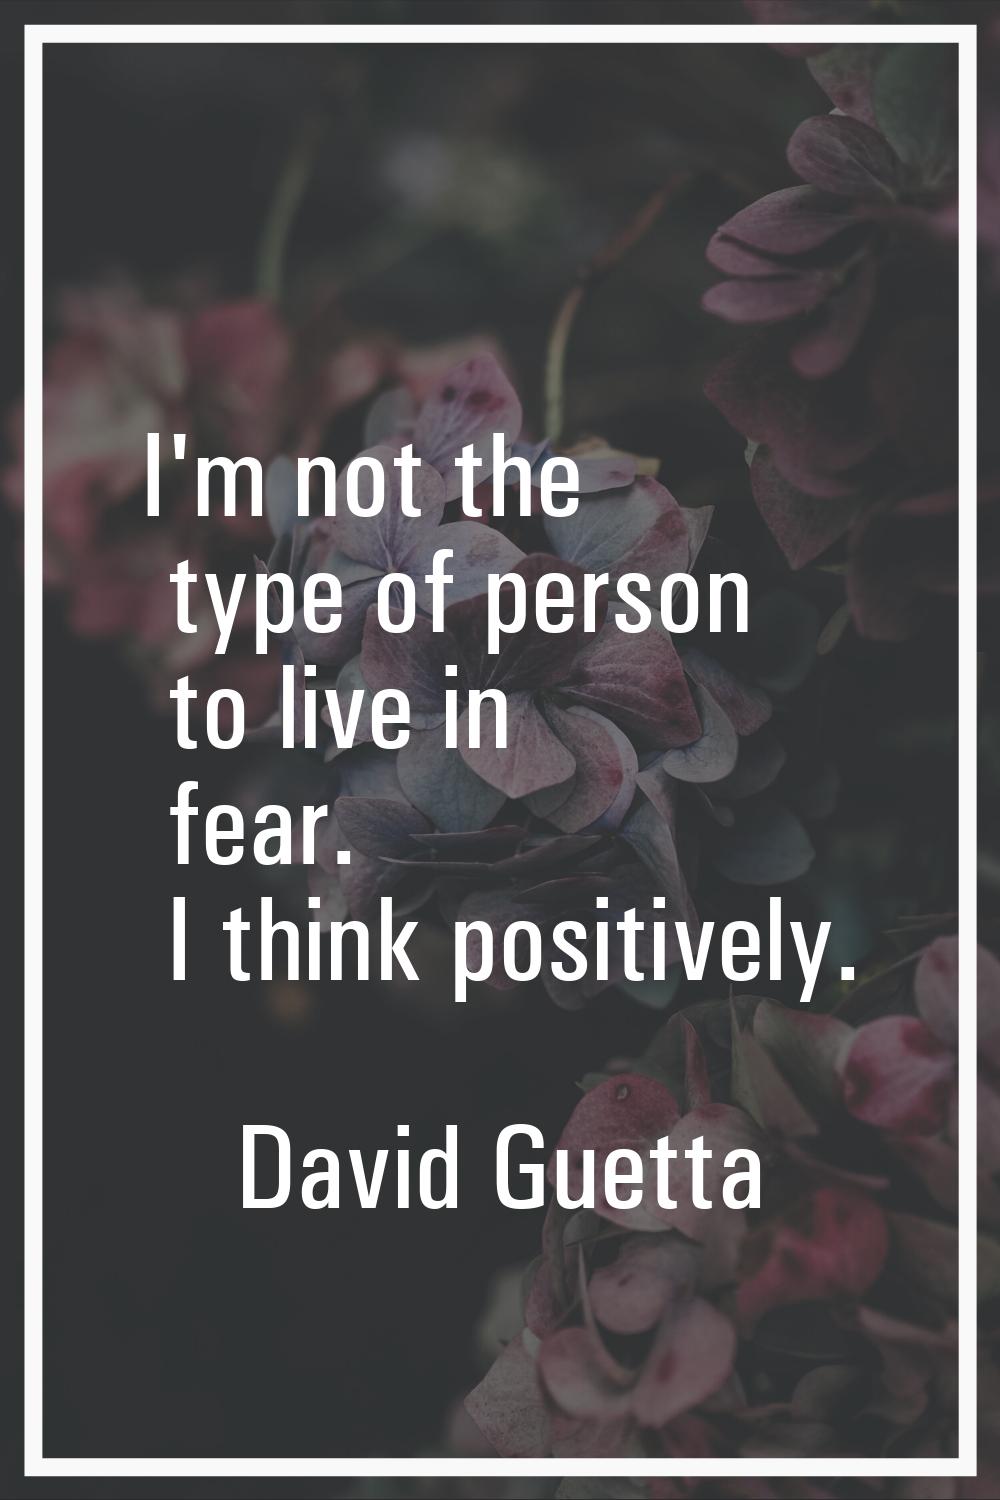 I'm not the type of person to live in fear. I think positively.